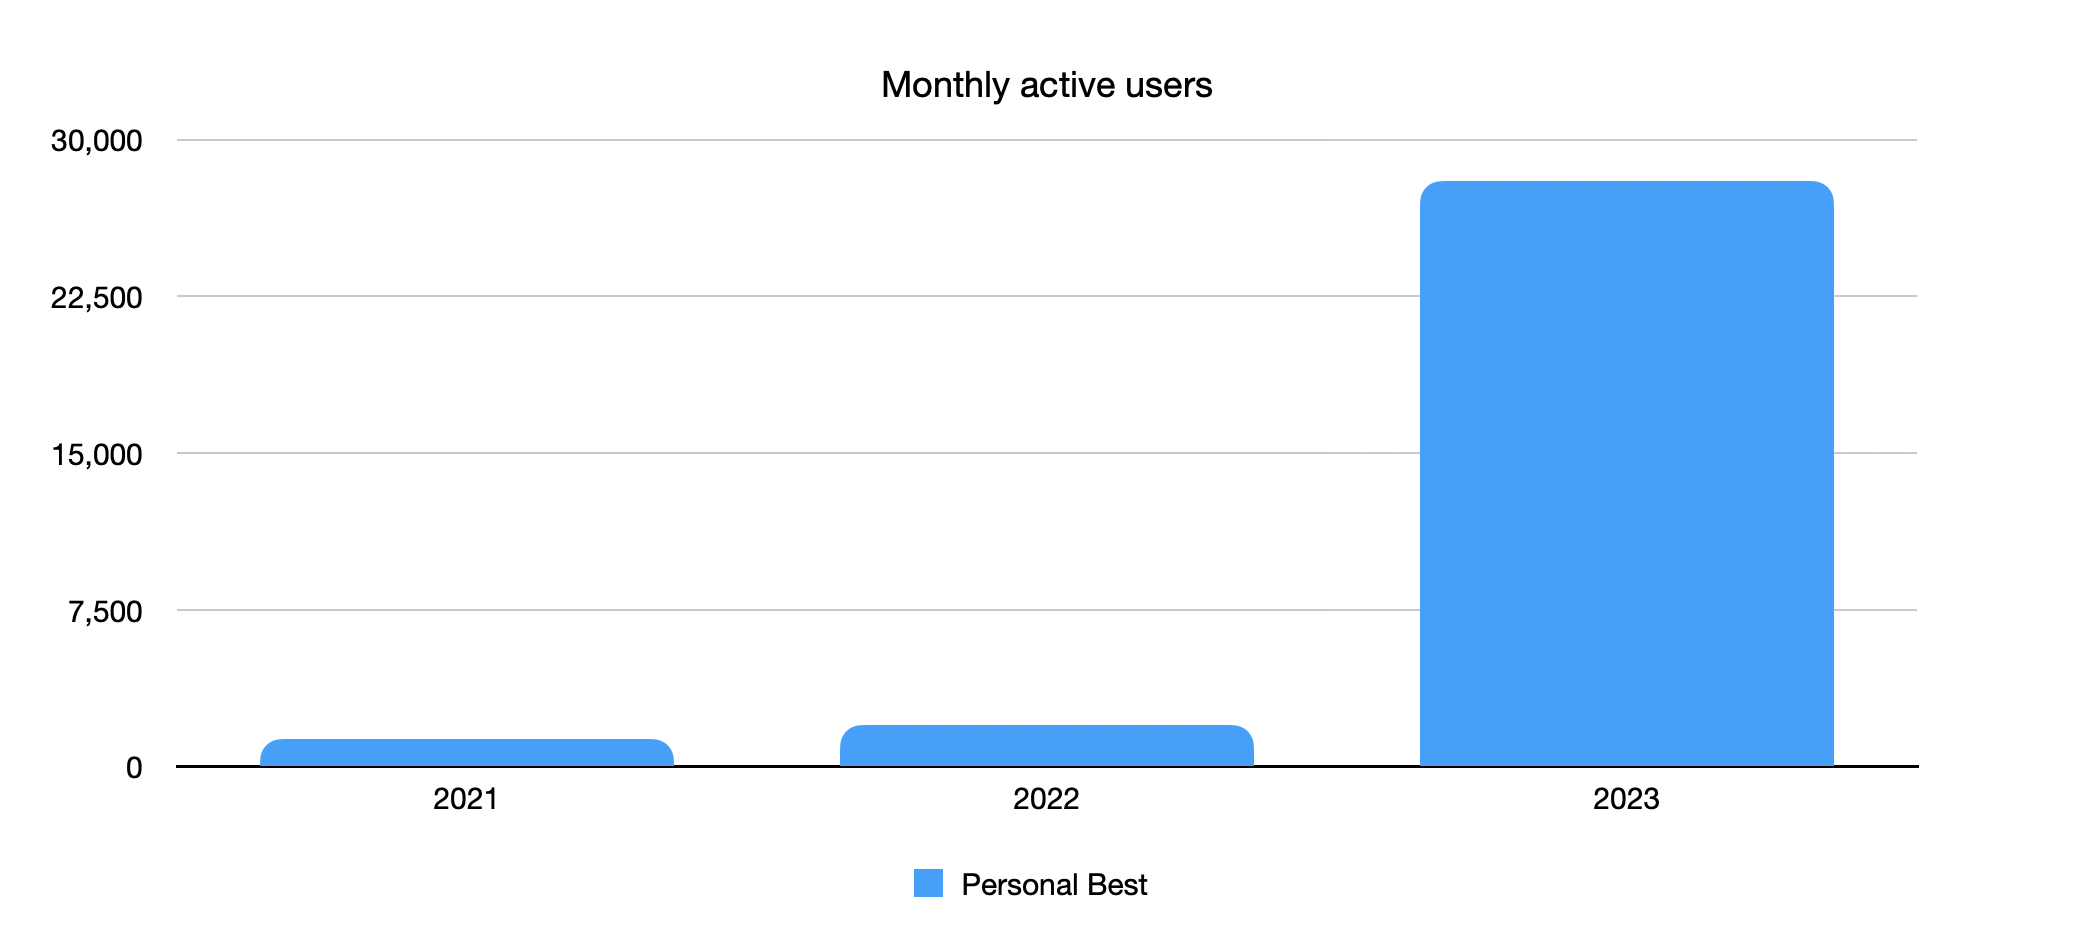 Visualisation of Personal Best's monthly active users